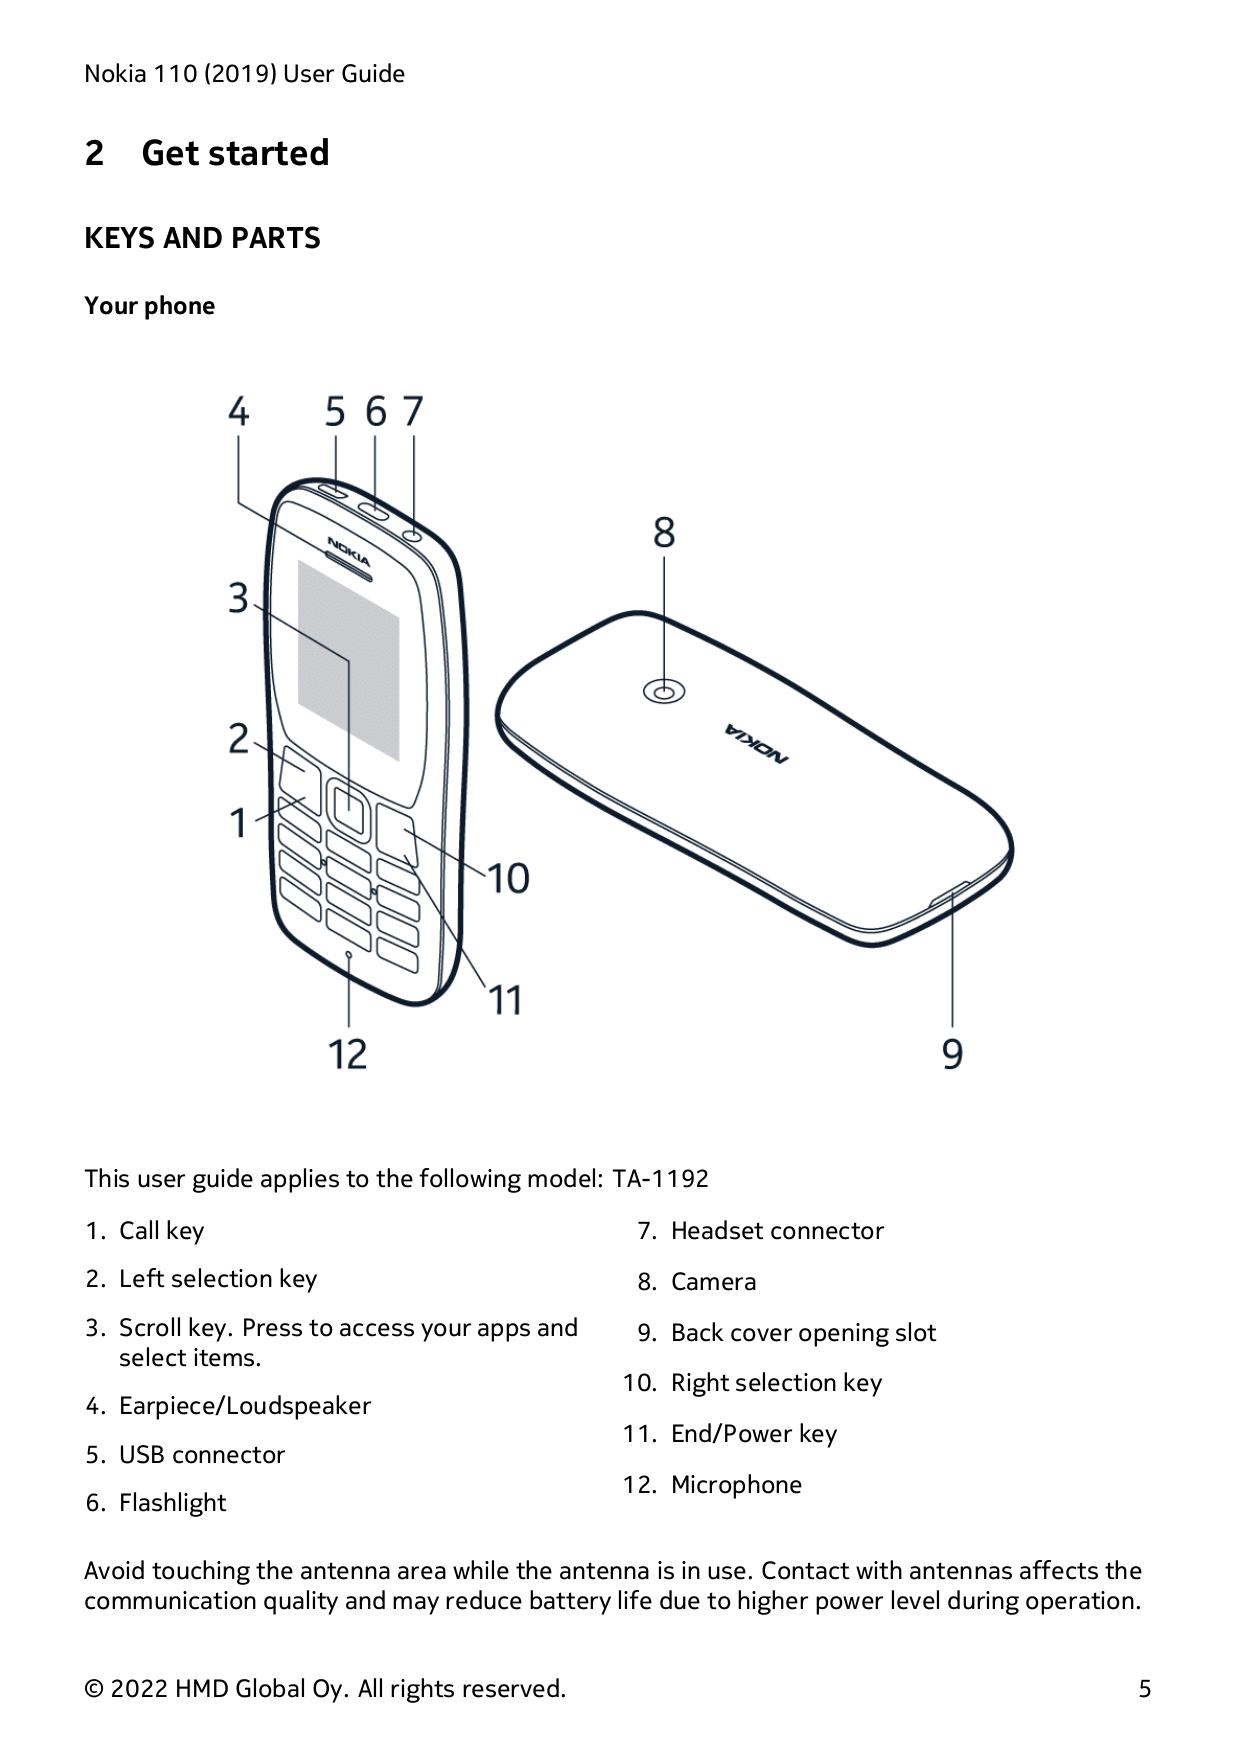 Nokia 110 (2019) User Guide2Get startedKEYS AND PARTSYour phoneThis user guide applies to the following model: TA-11921. Call ke